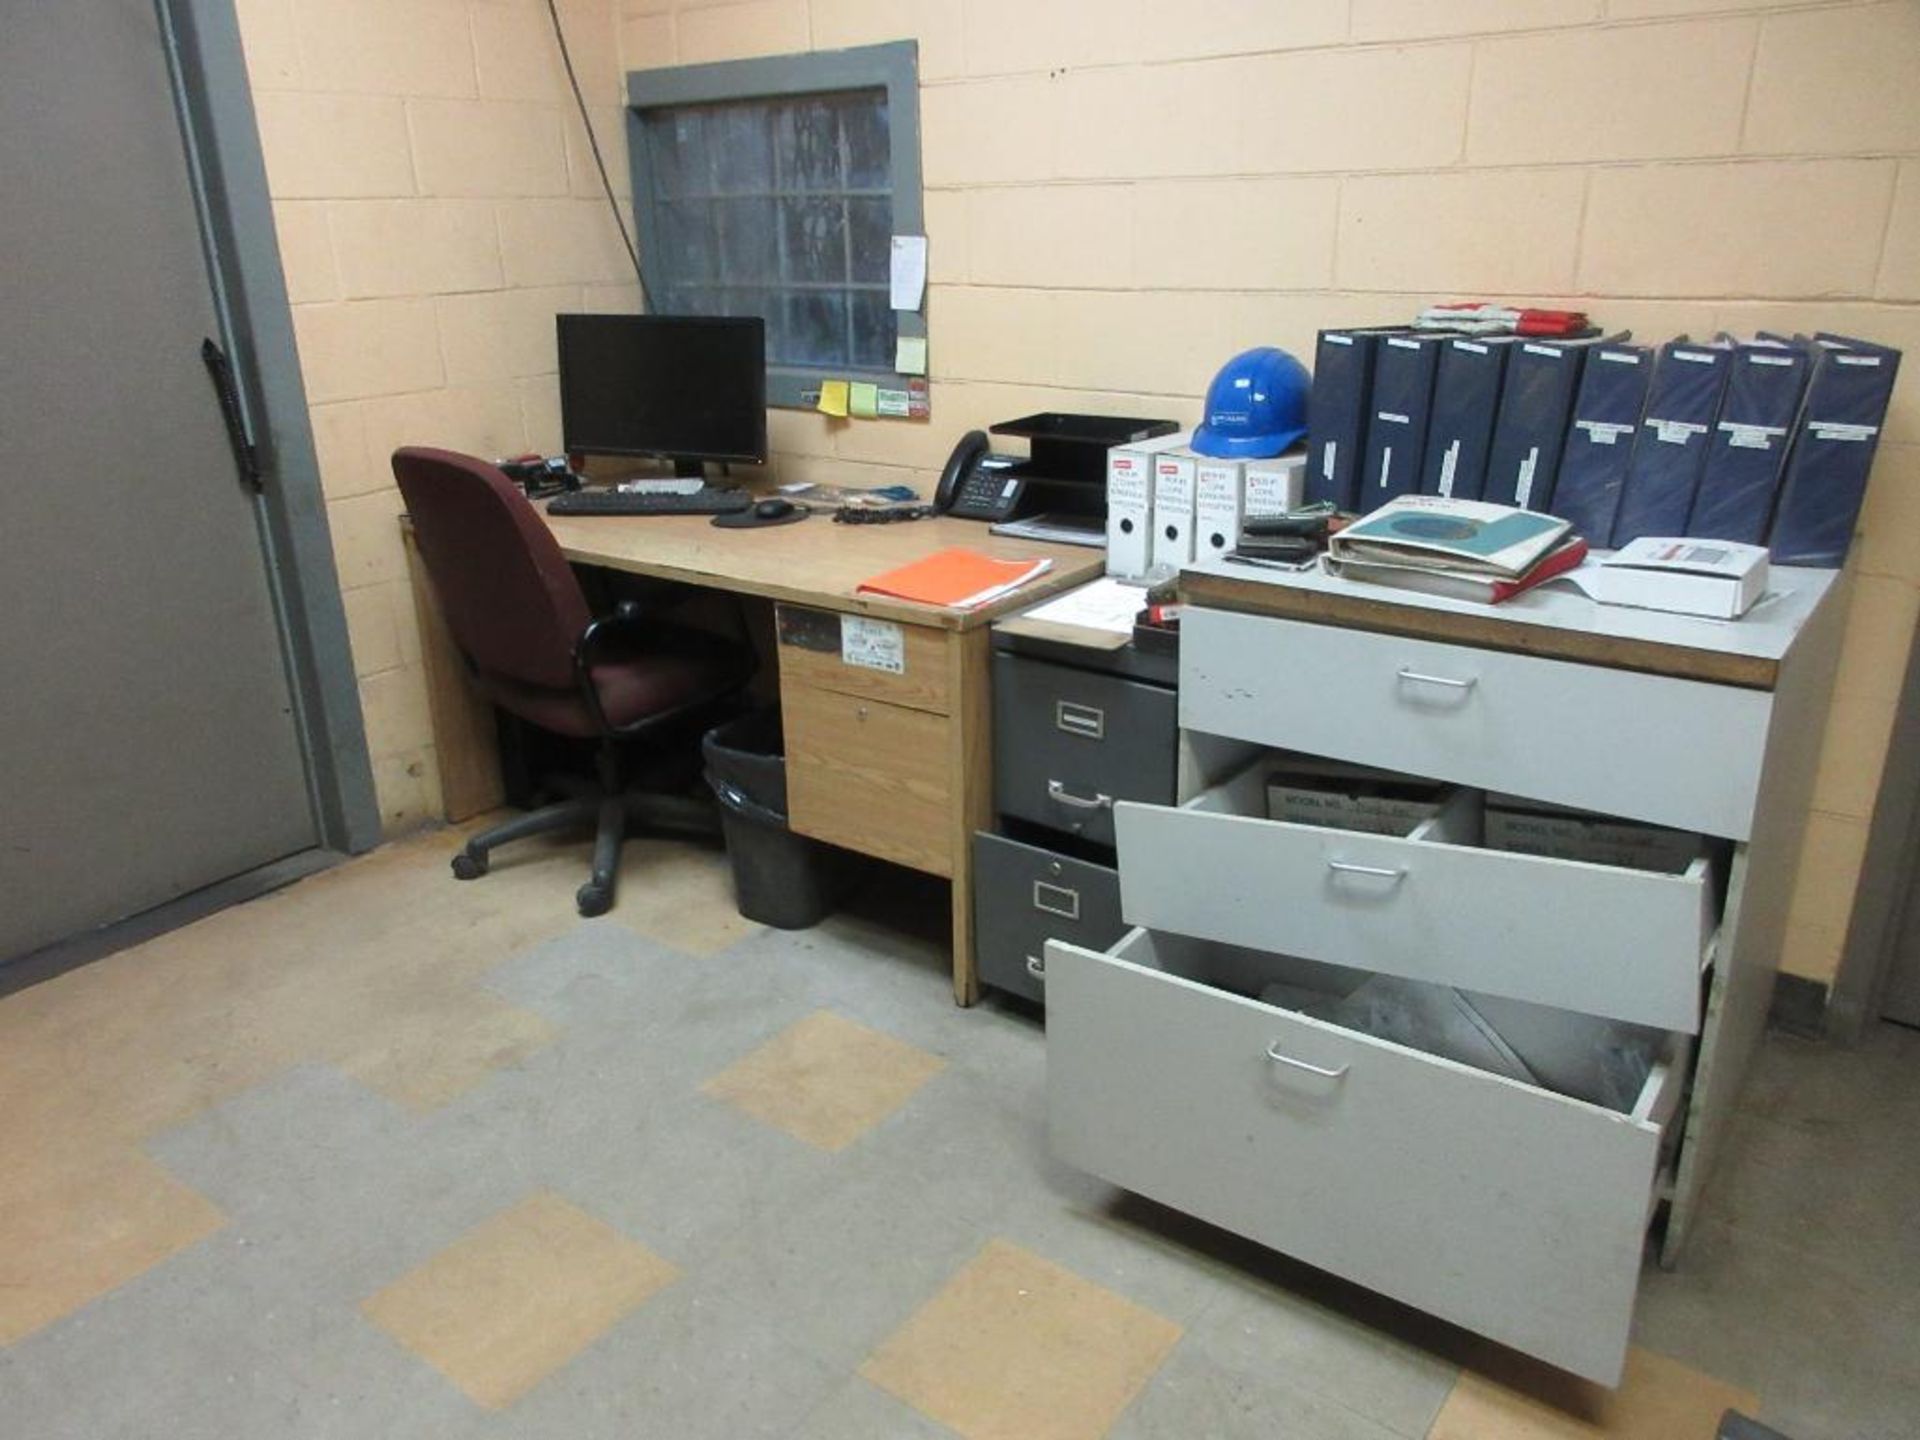 CONTENTS OF 1 OFFICE INCL 6 FILE CABINETS, 1 DESK, 3 CHAIRS, KP5100 DIGITAL SCALE (NO ELECTRONICS (O